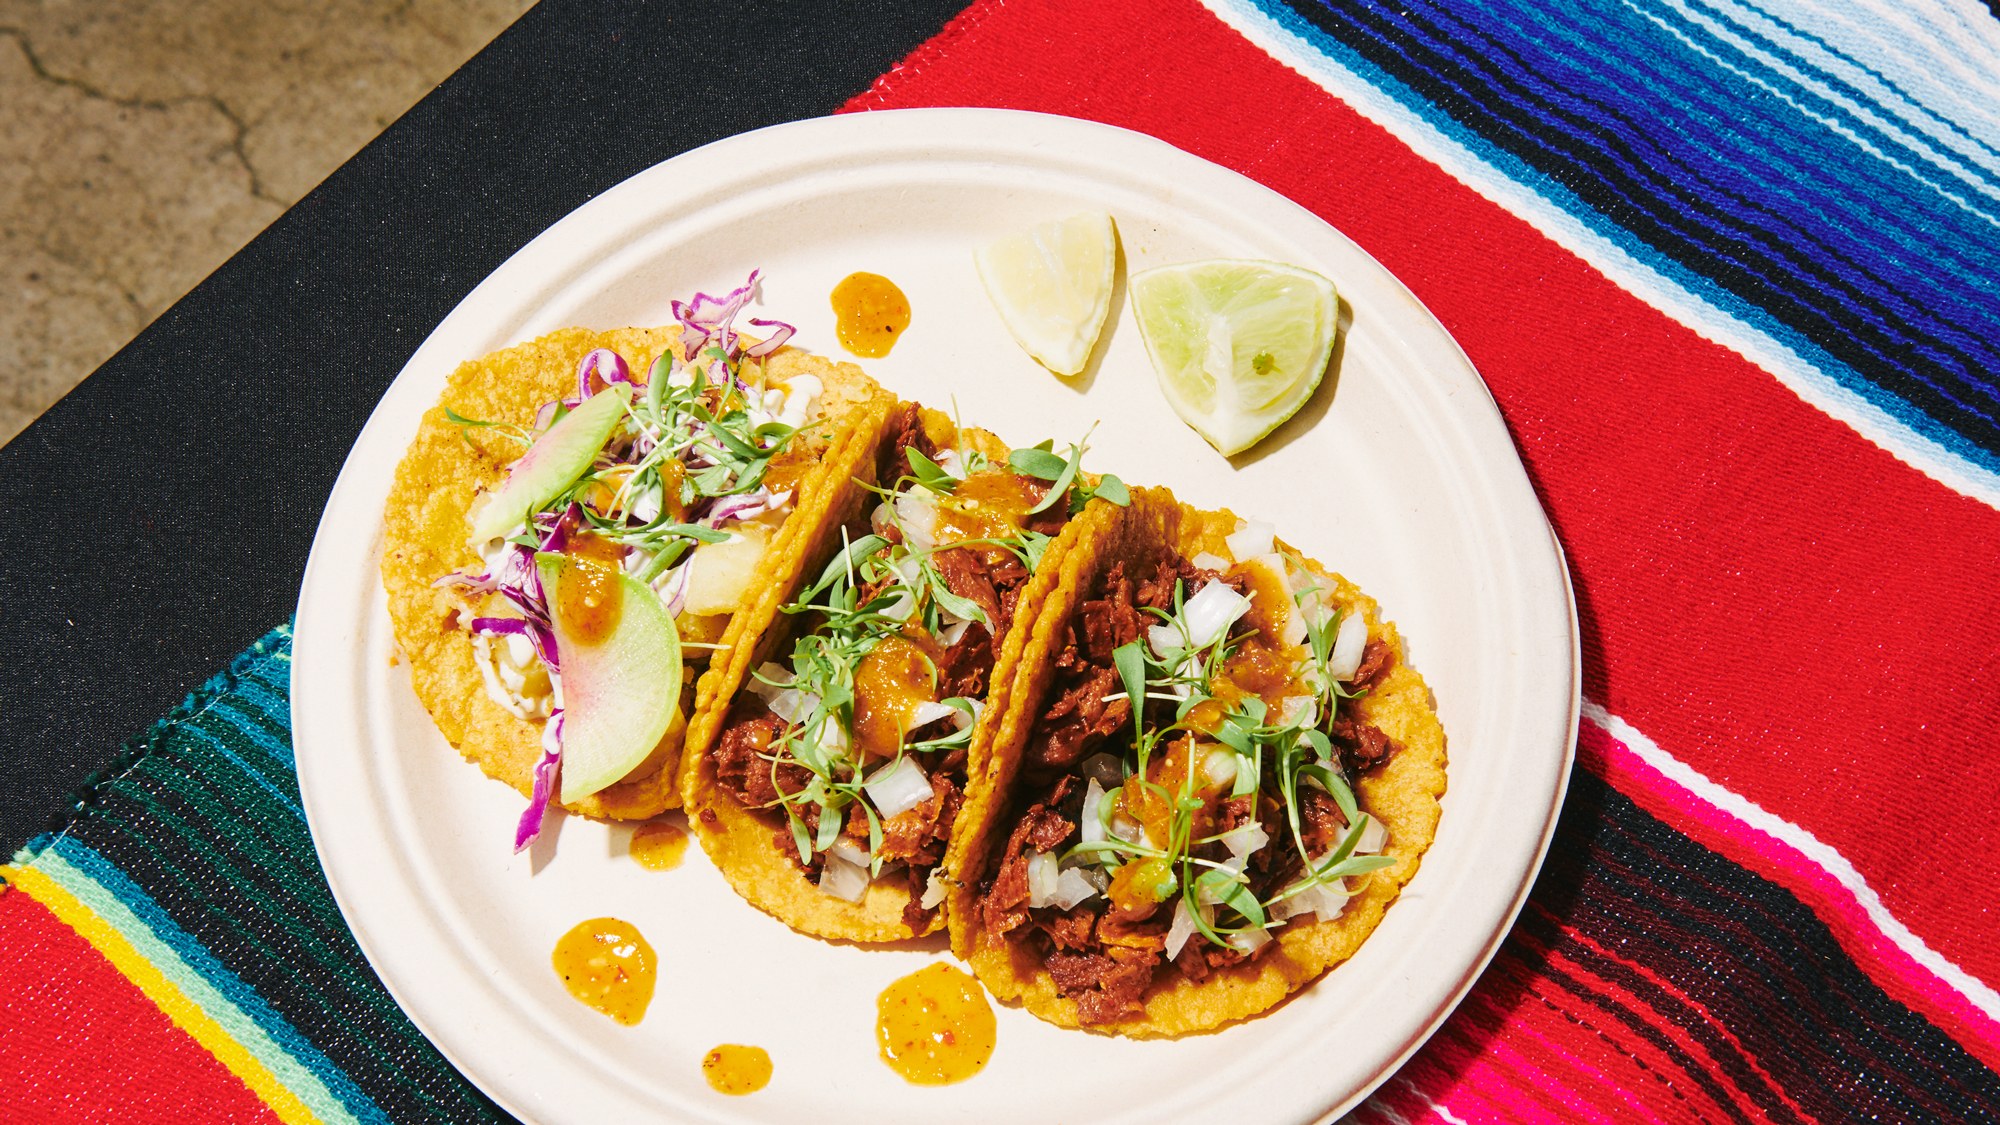 These Vegan Tacos Are More Than a Trend